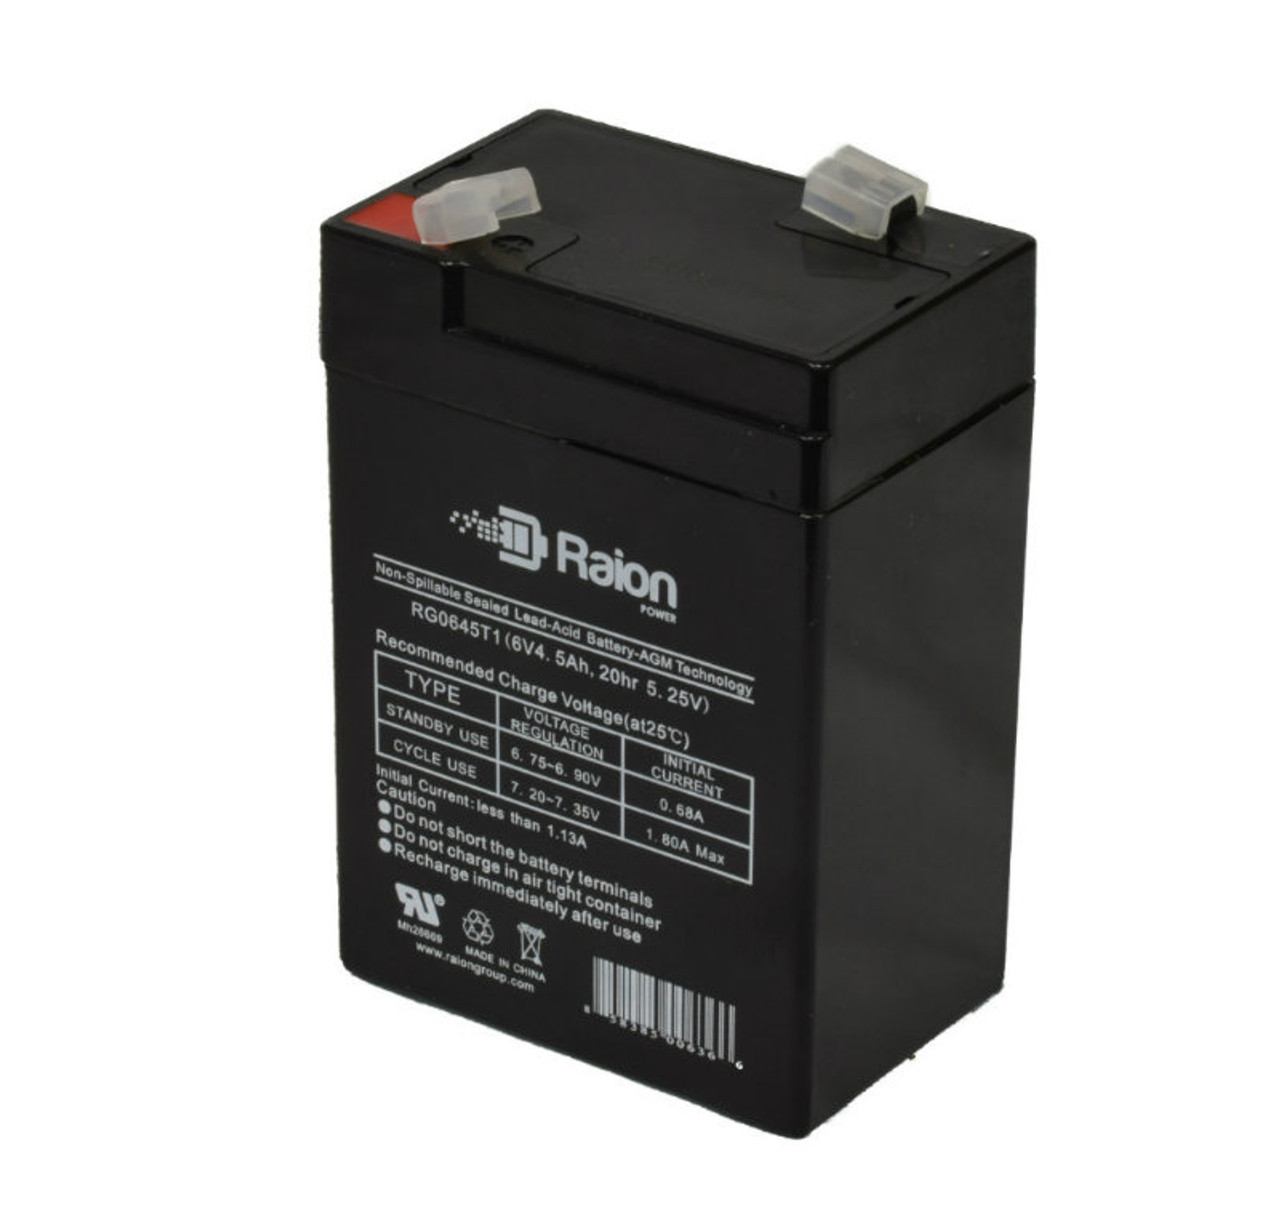 Raion Power RG0645T1 6V 4.5Ah Replacement Battery Cartridge for Sure-Lites MPS640SP